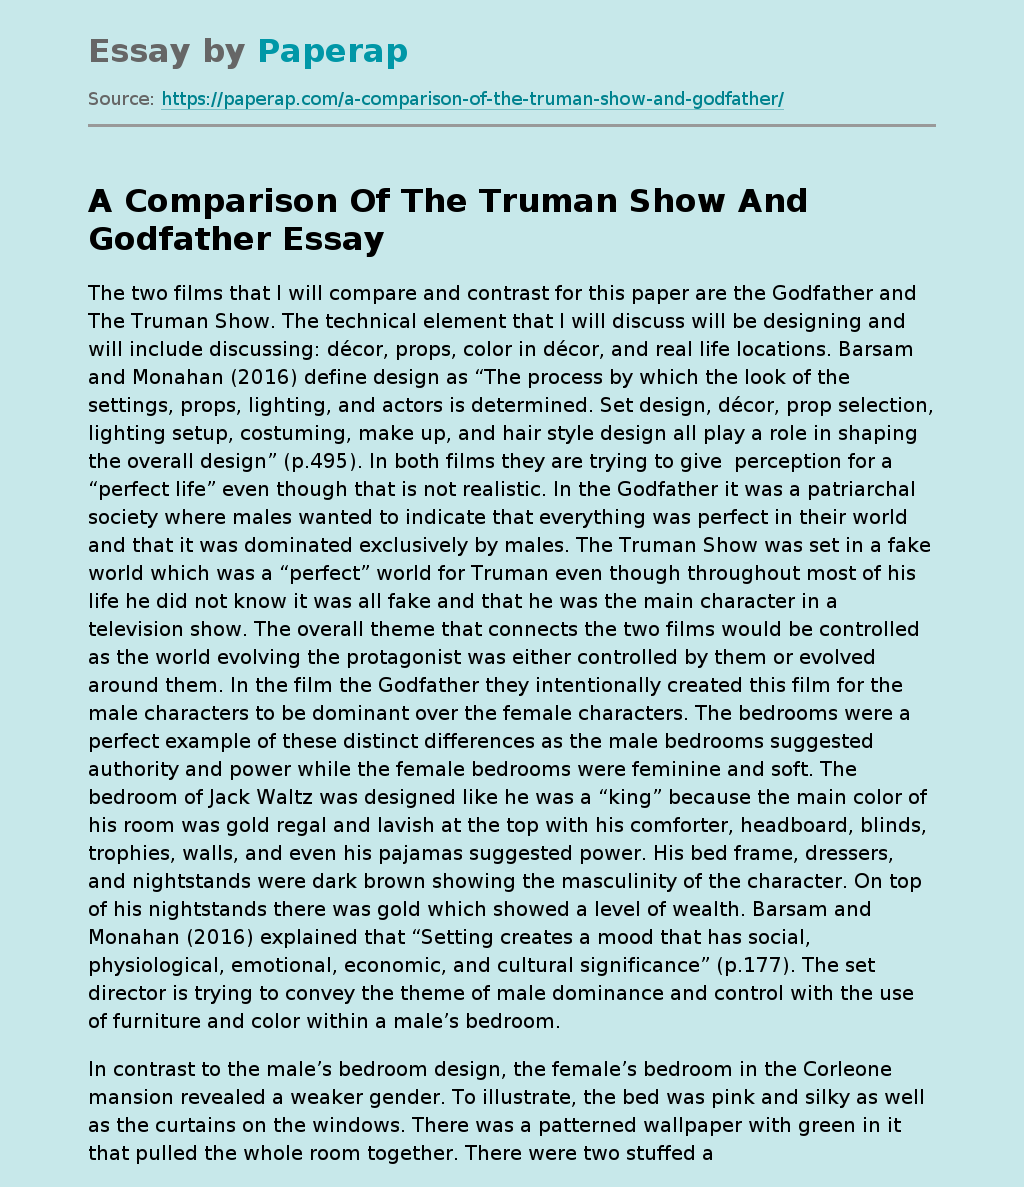 A Comparison Of The Truman Show And Godfather